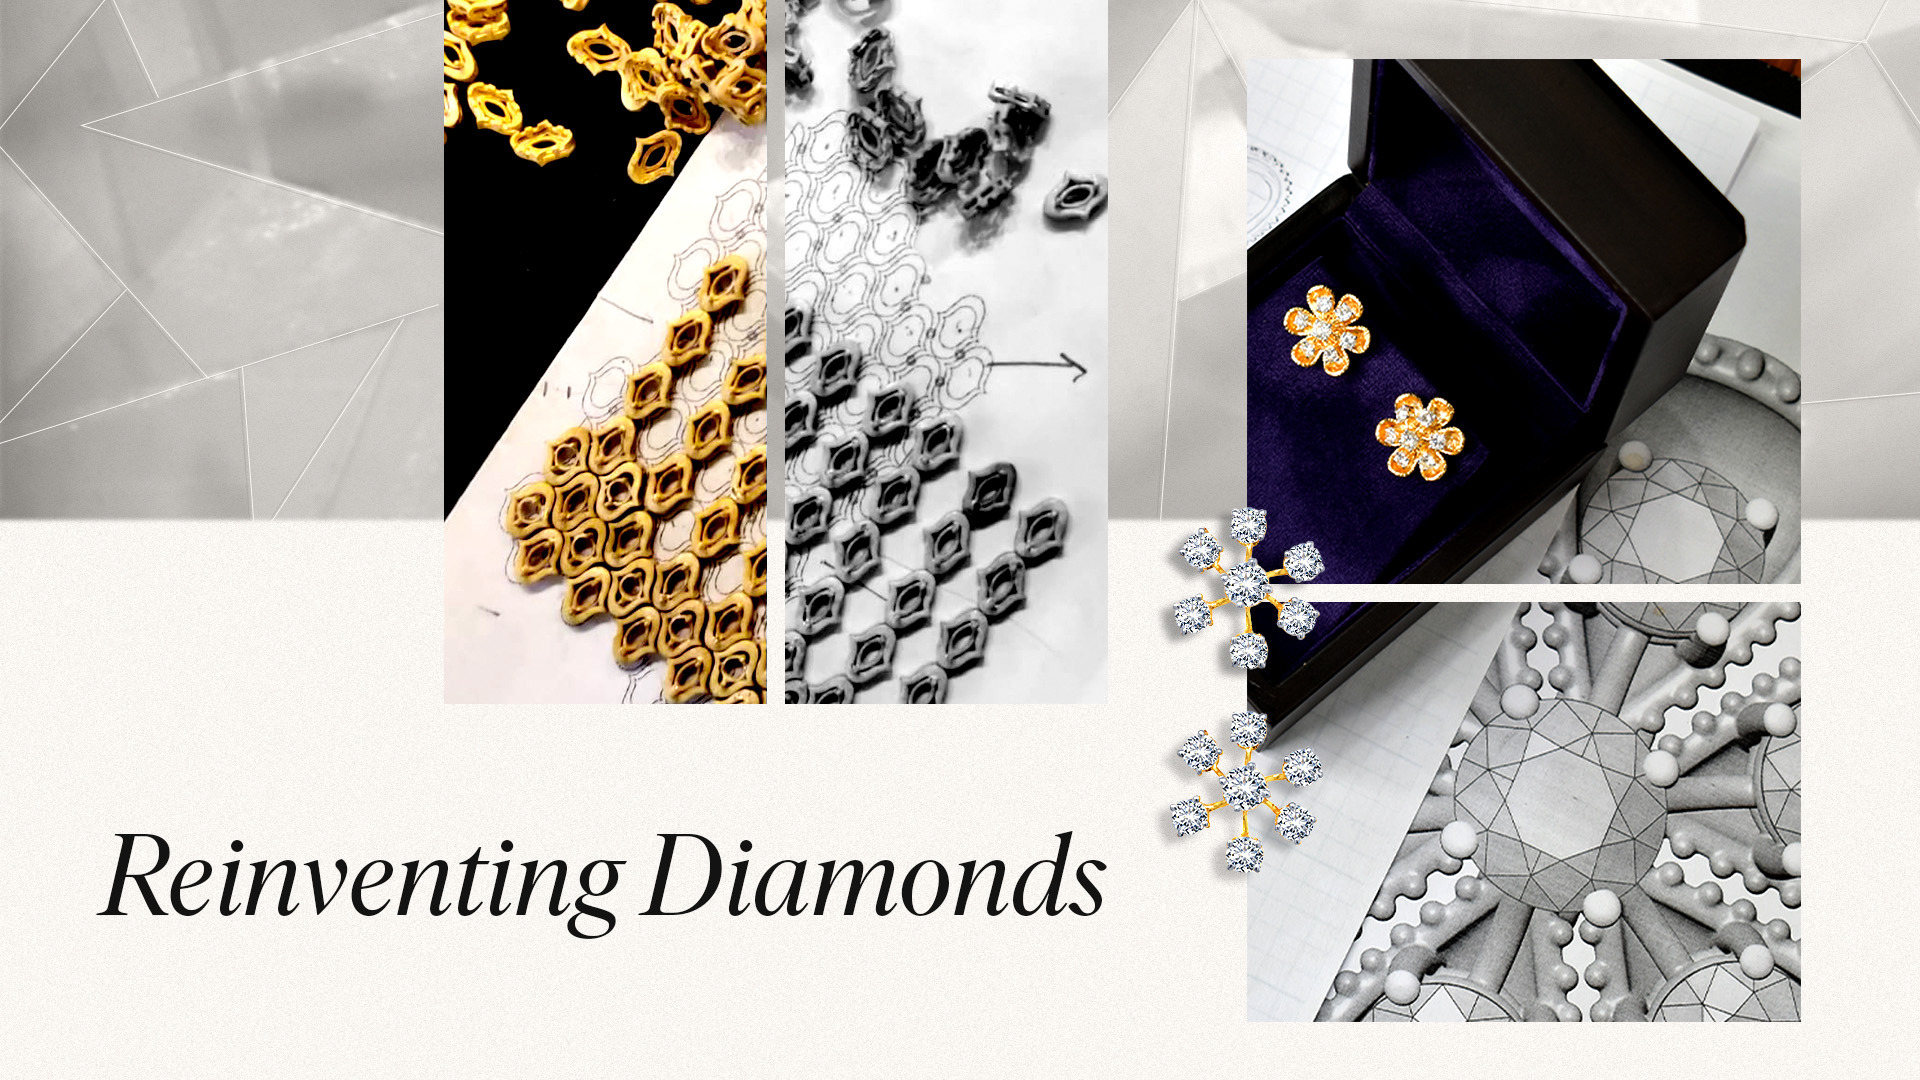 Reinventing Diamonds with Only Natural Diamonds